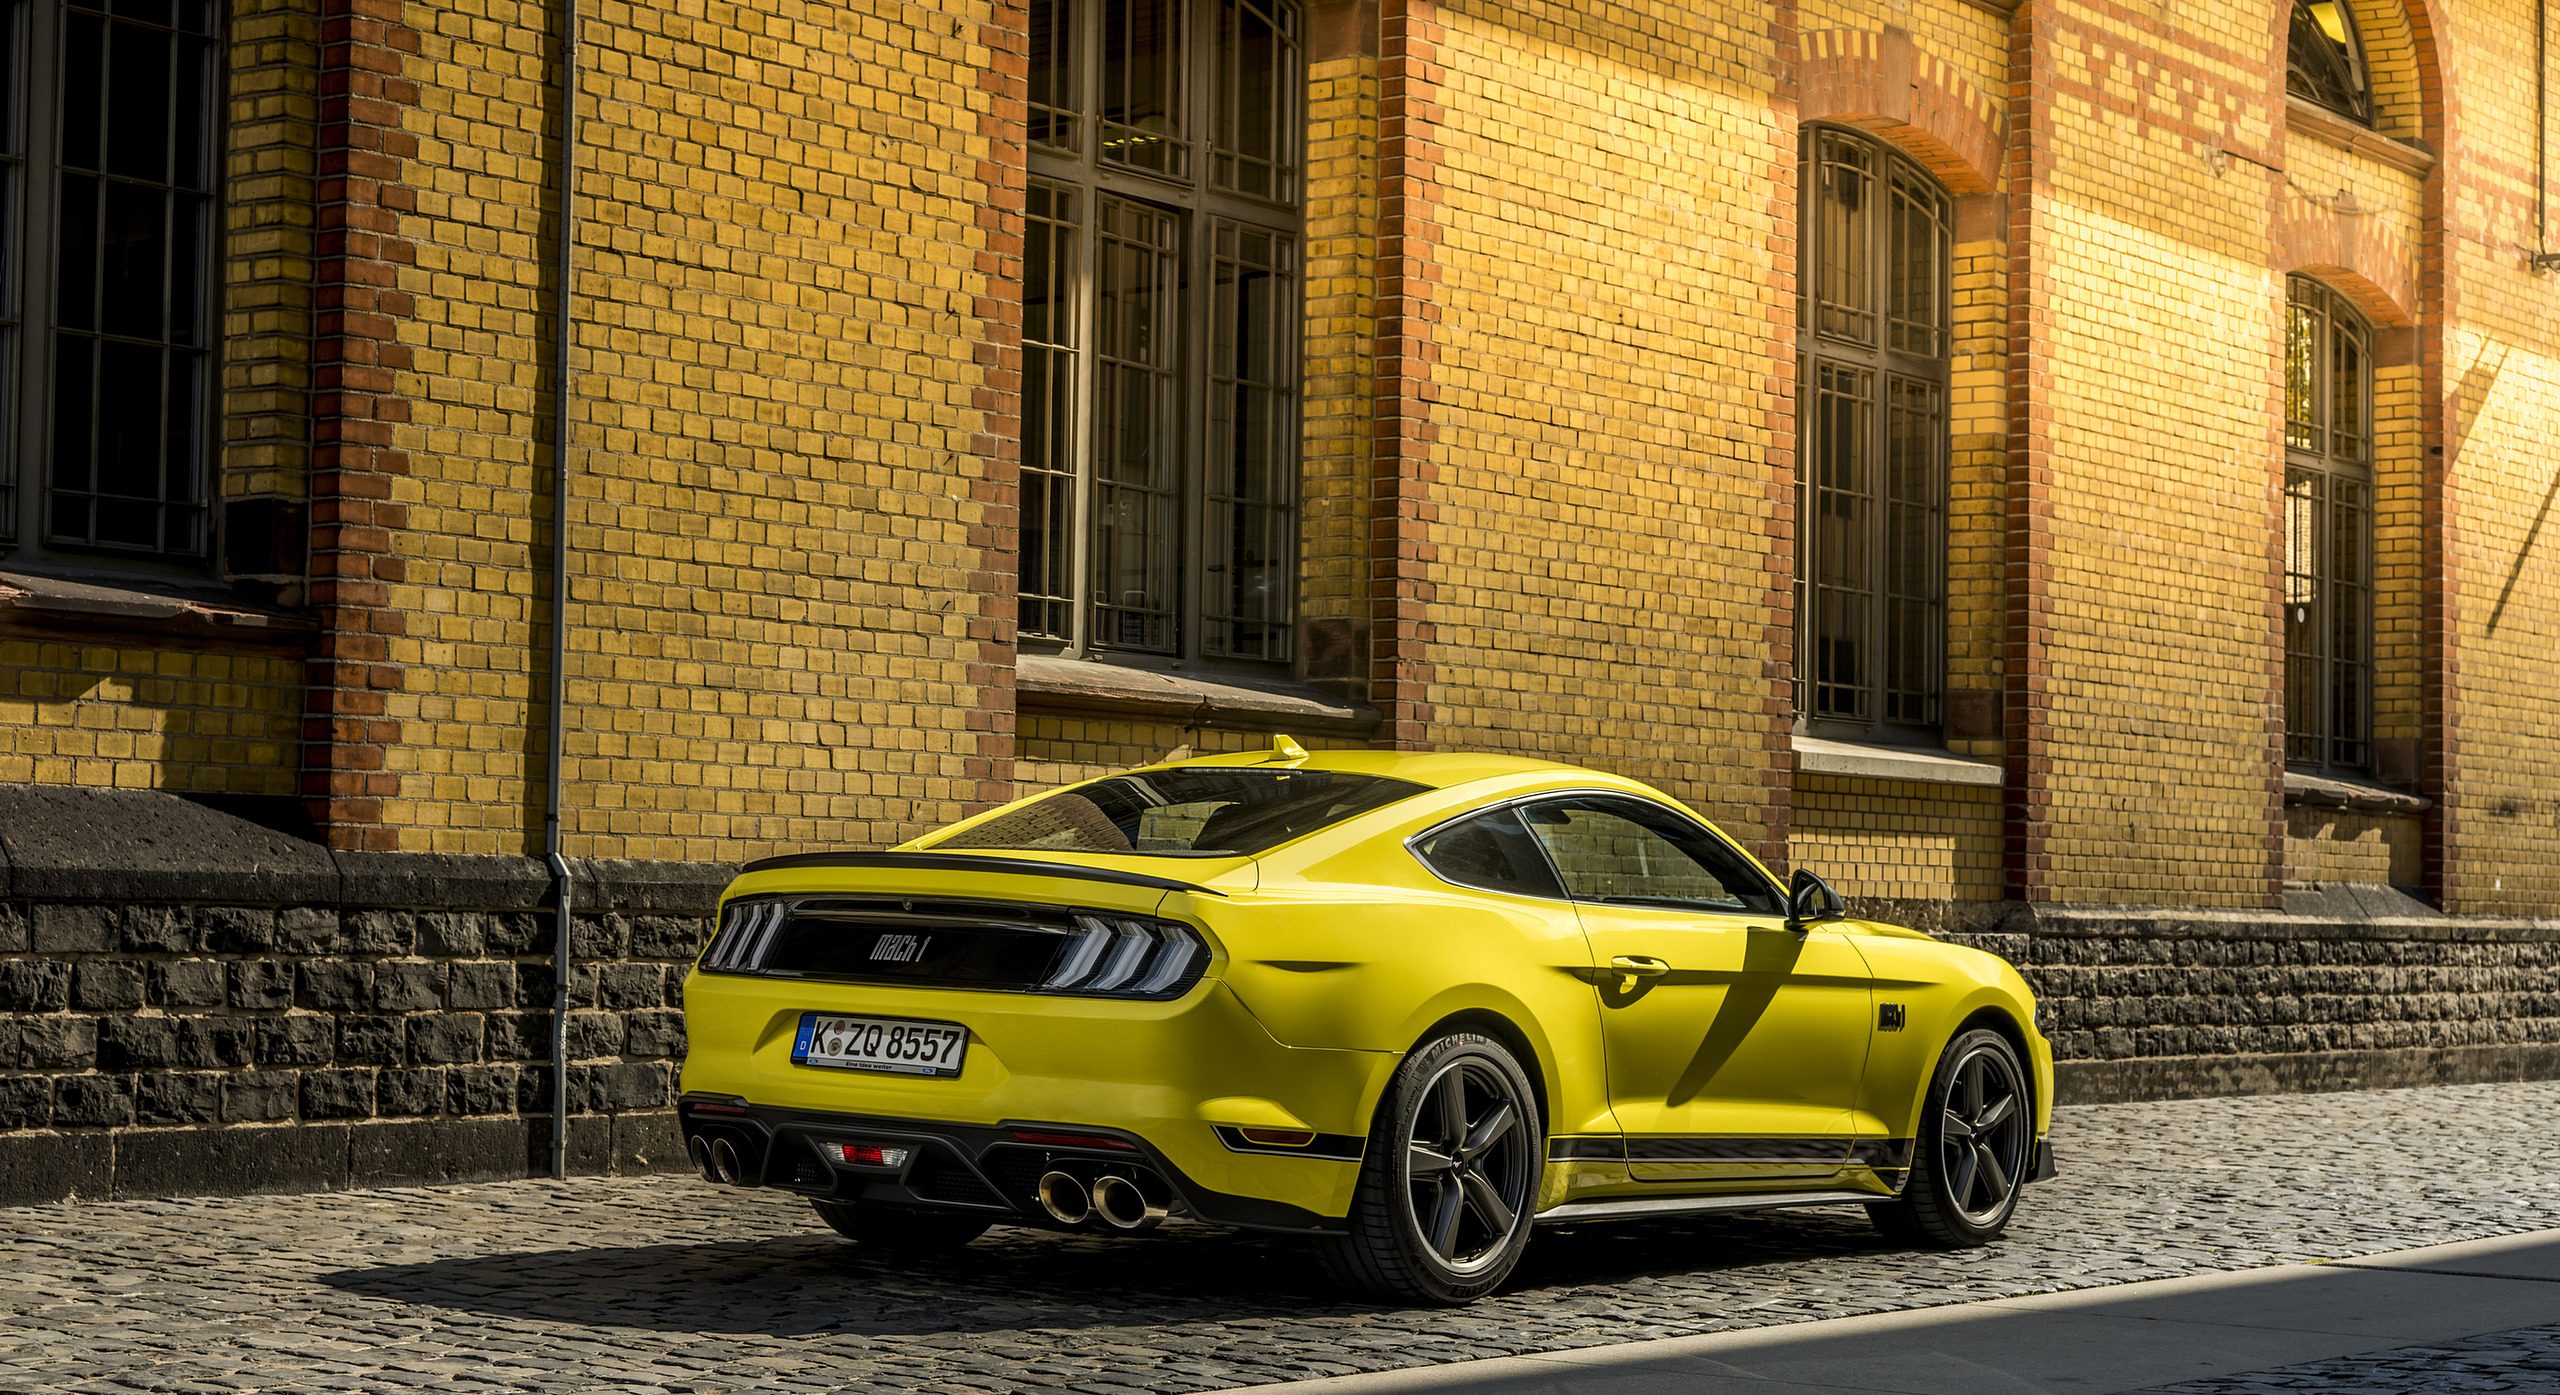 Mustang Of The Day: Grabber Yellow 2021 Mustang Mach 1